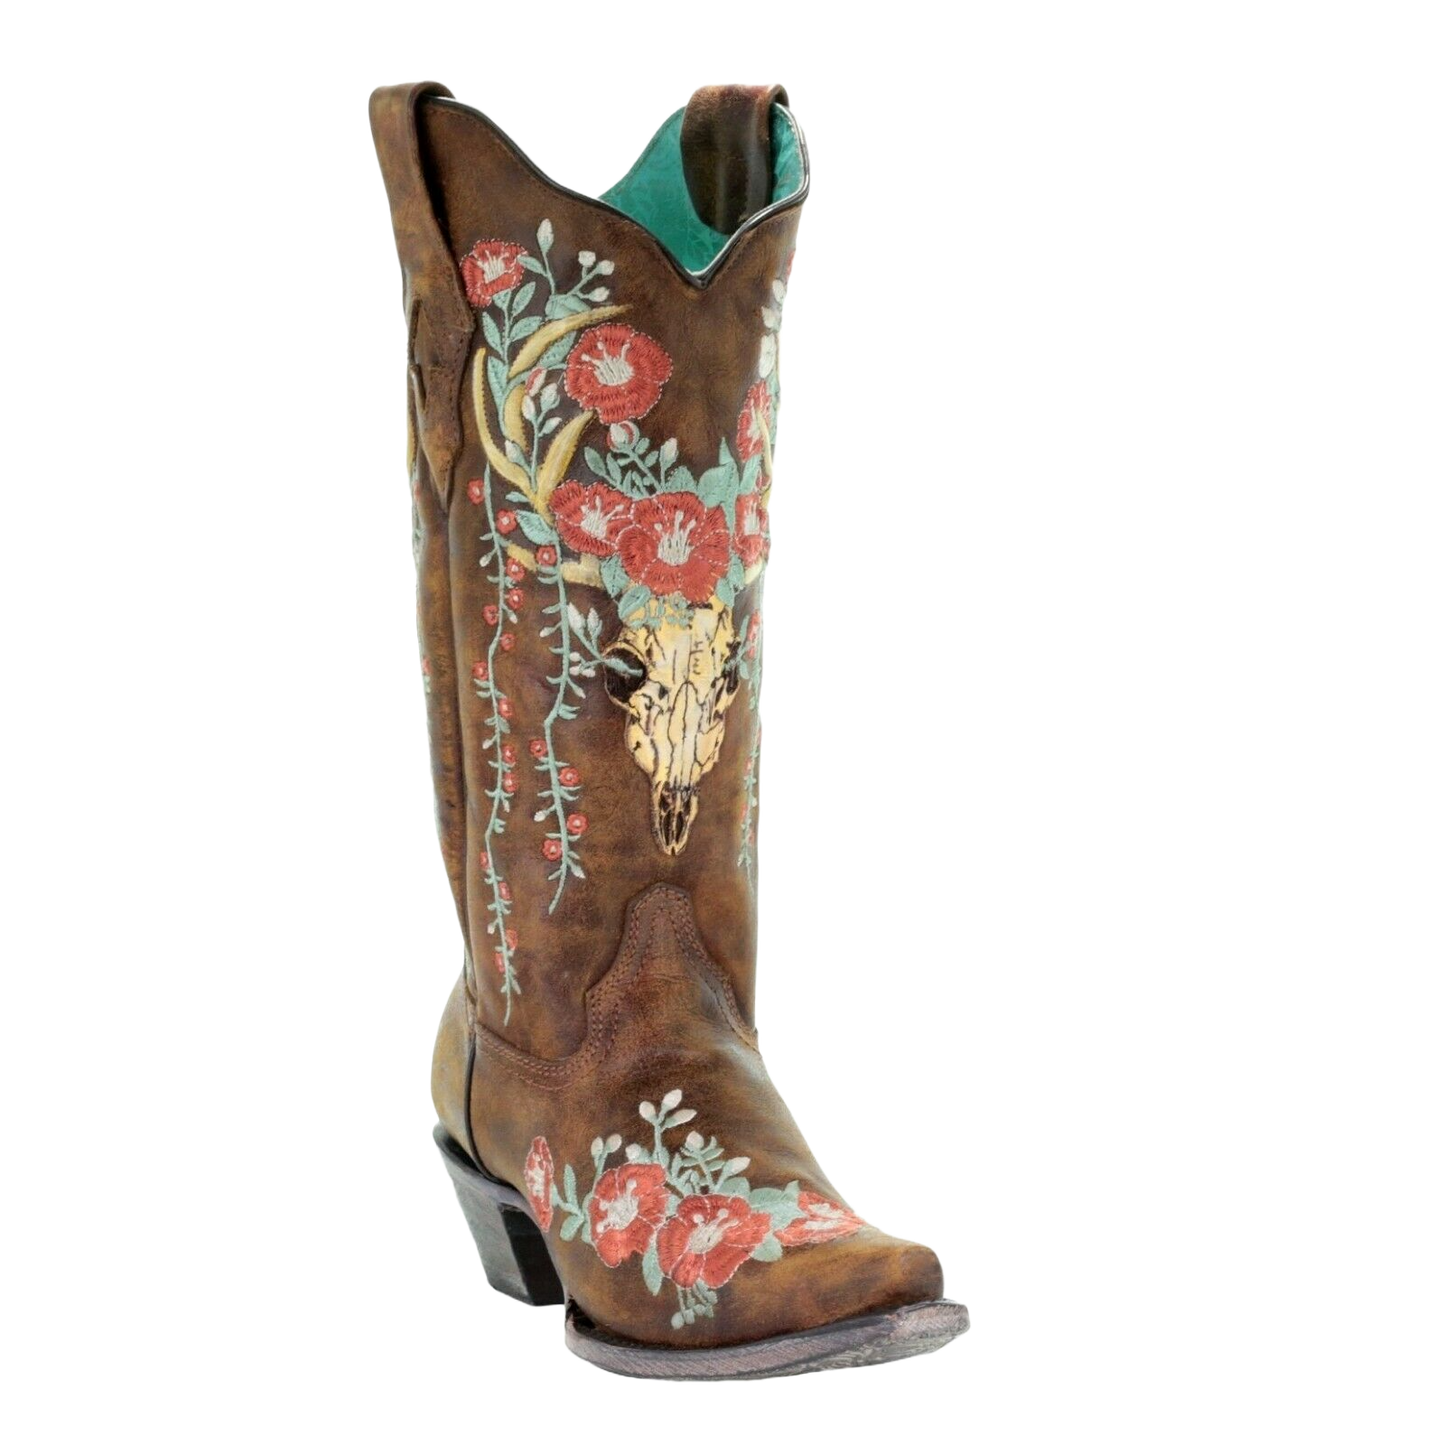 Corral Ladies Tan Deer Skull Overlay & Floral Embroidered Boots A3652